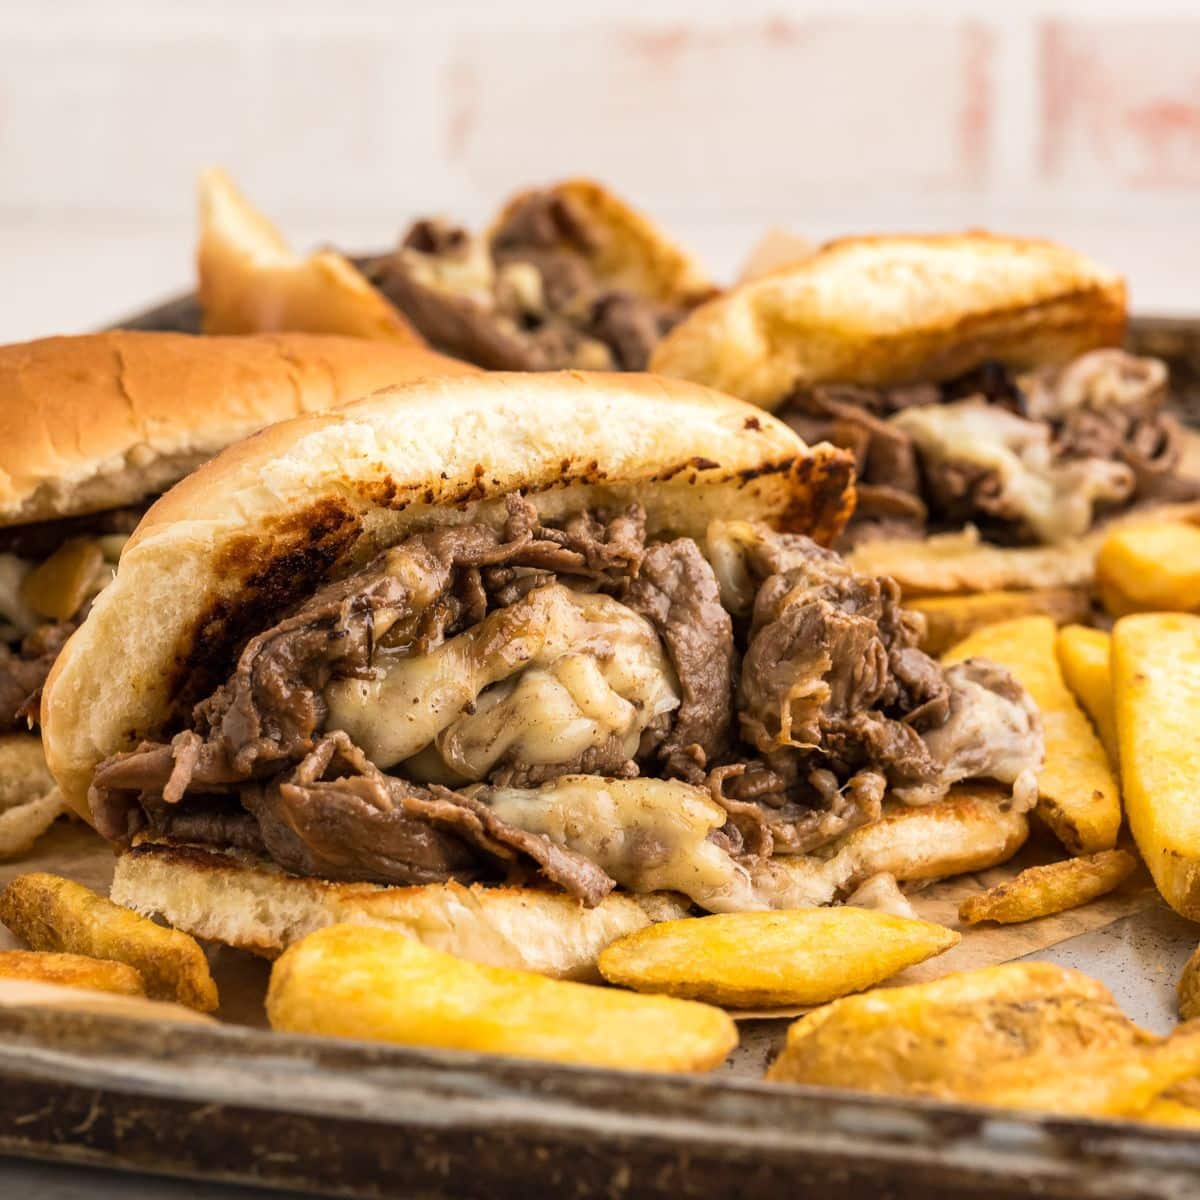 Philly cheese steak sandwich on a tray with french fries surrounding it.